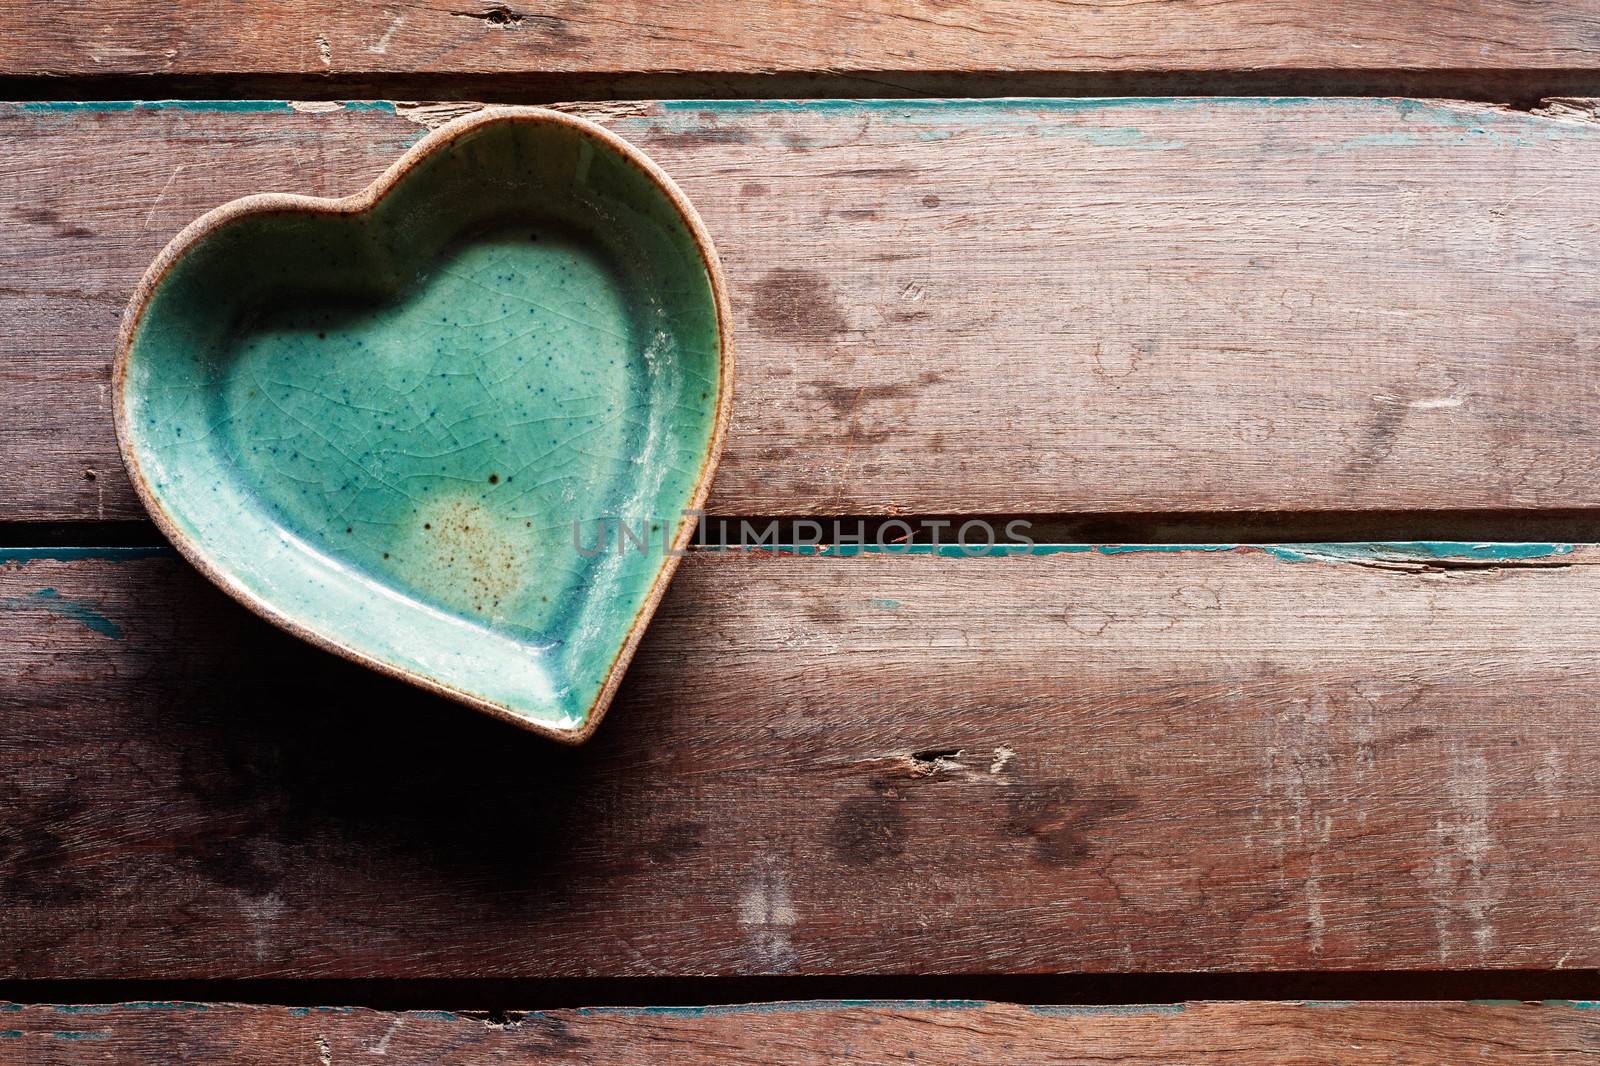 Coffee cup saucer shaped heart on old wood floors.